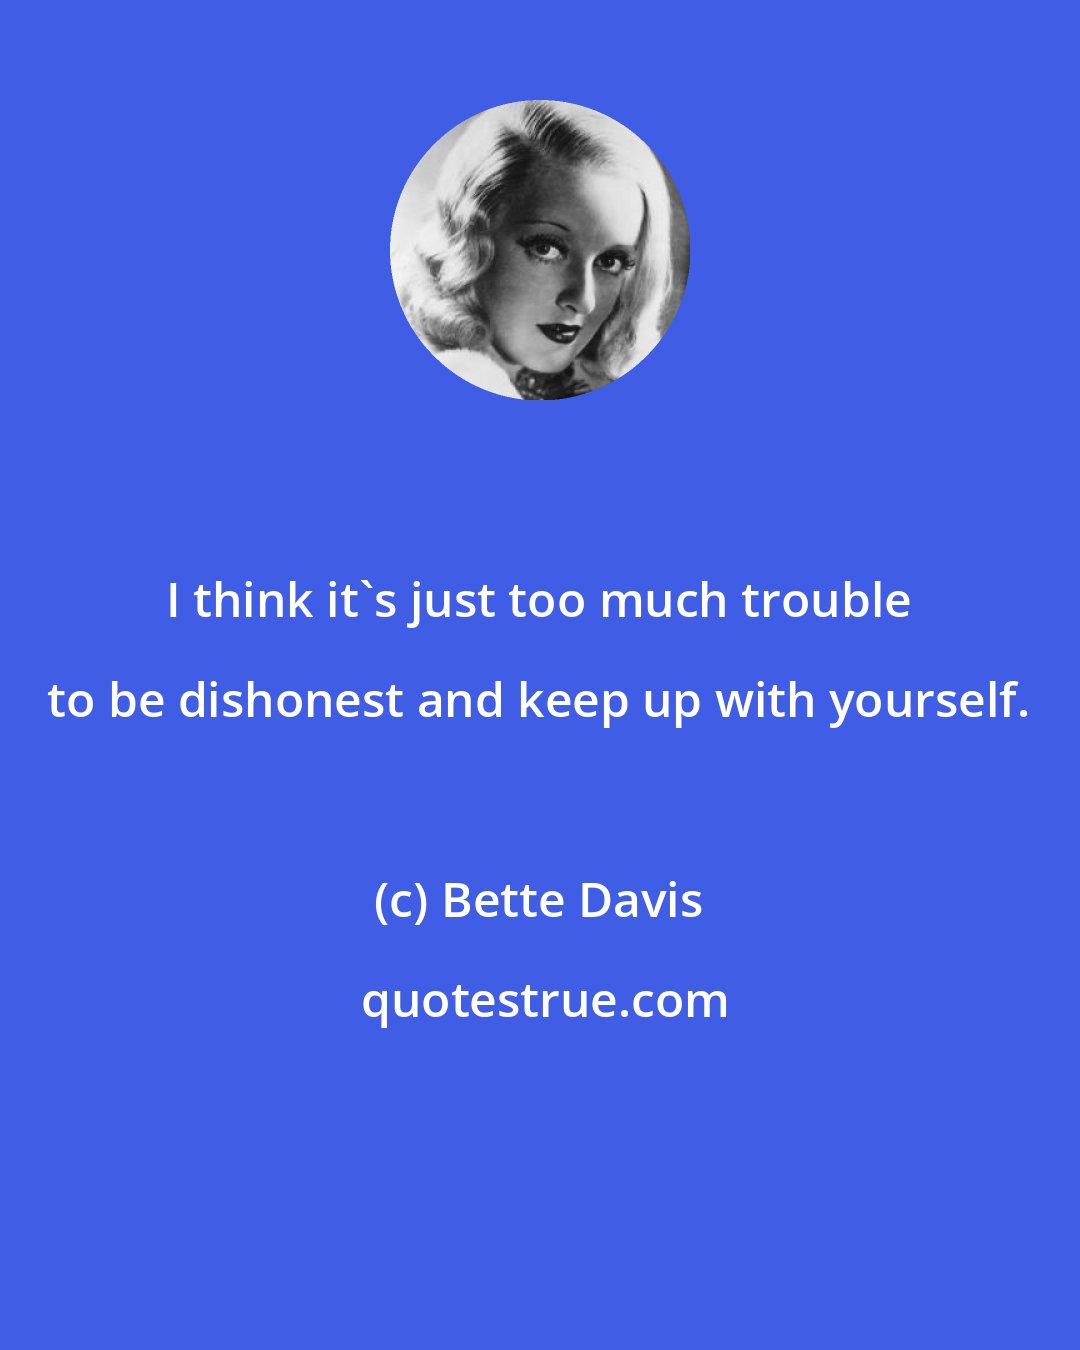 Bette Davis: I think it's just too much trouble to be dishonest and keep up with yourself.